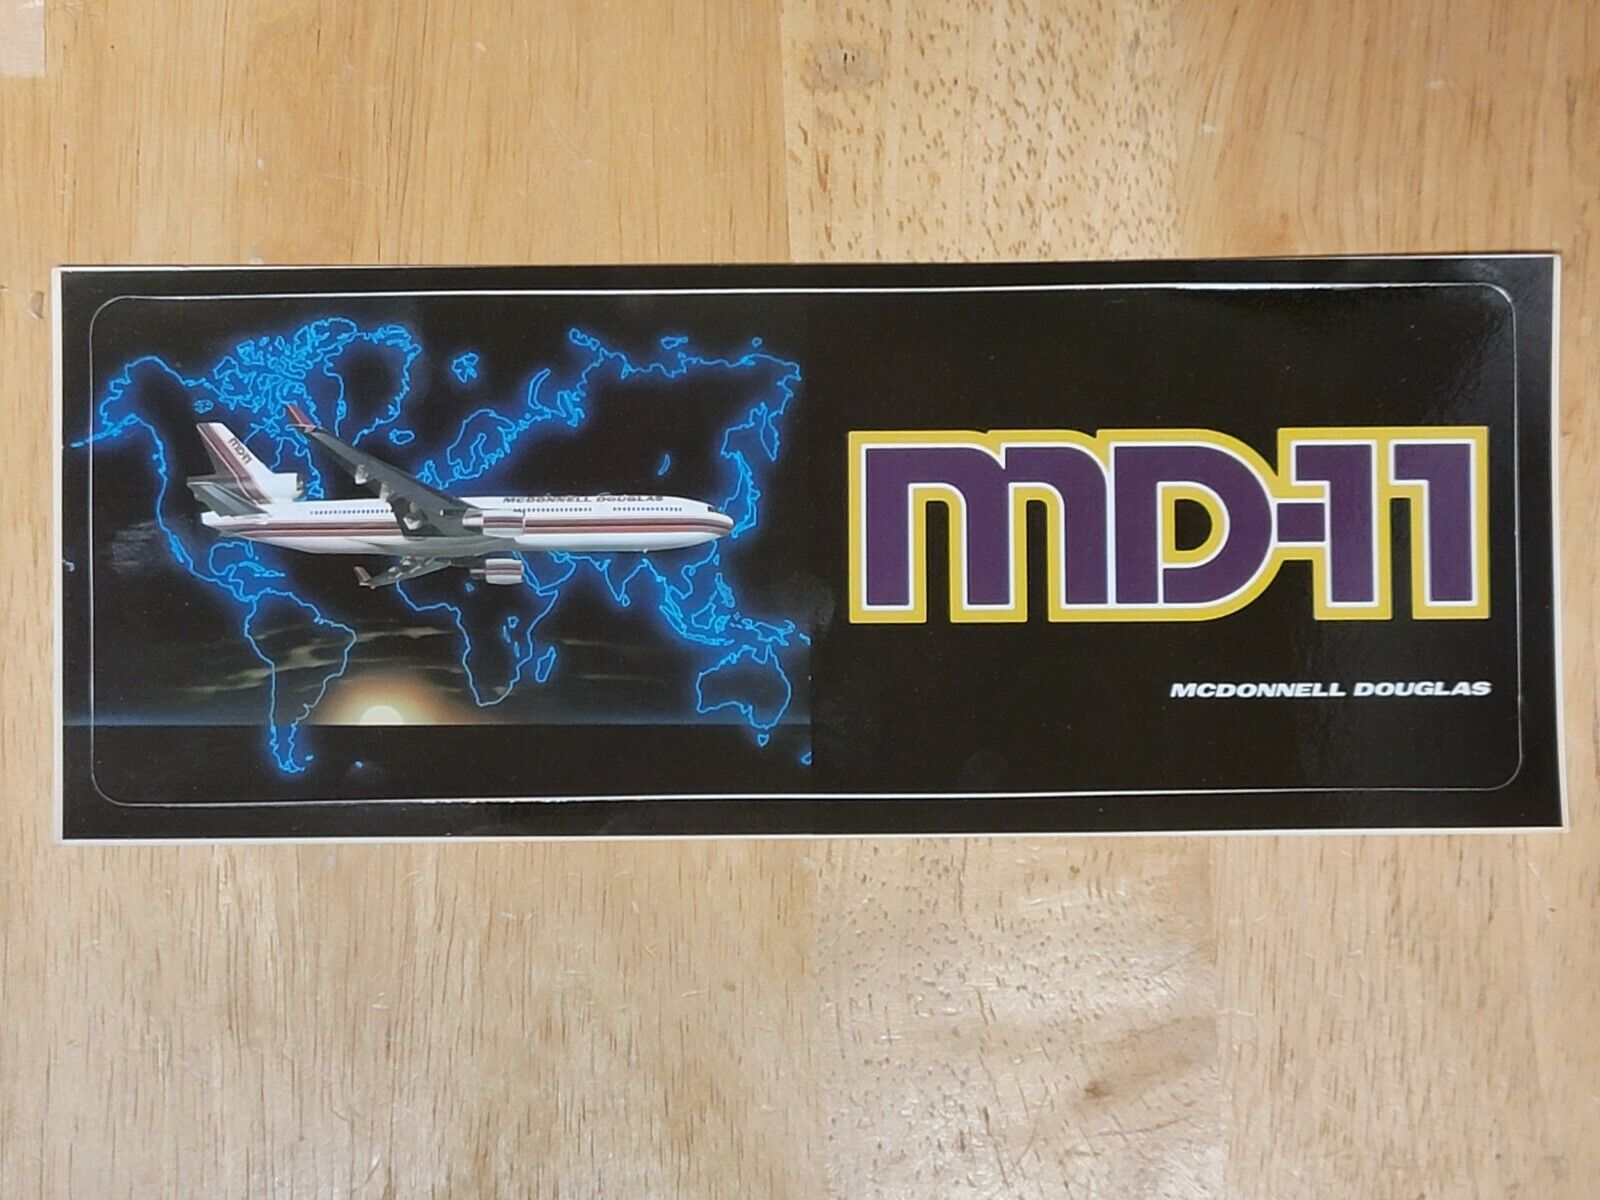 VINTAGE 1980s MCDONNELL DOUGLAS MD-11 Bumper AIRCRAFT STICKER DECAL NEW